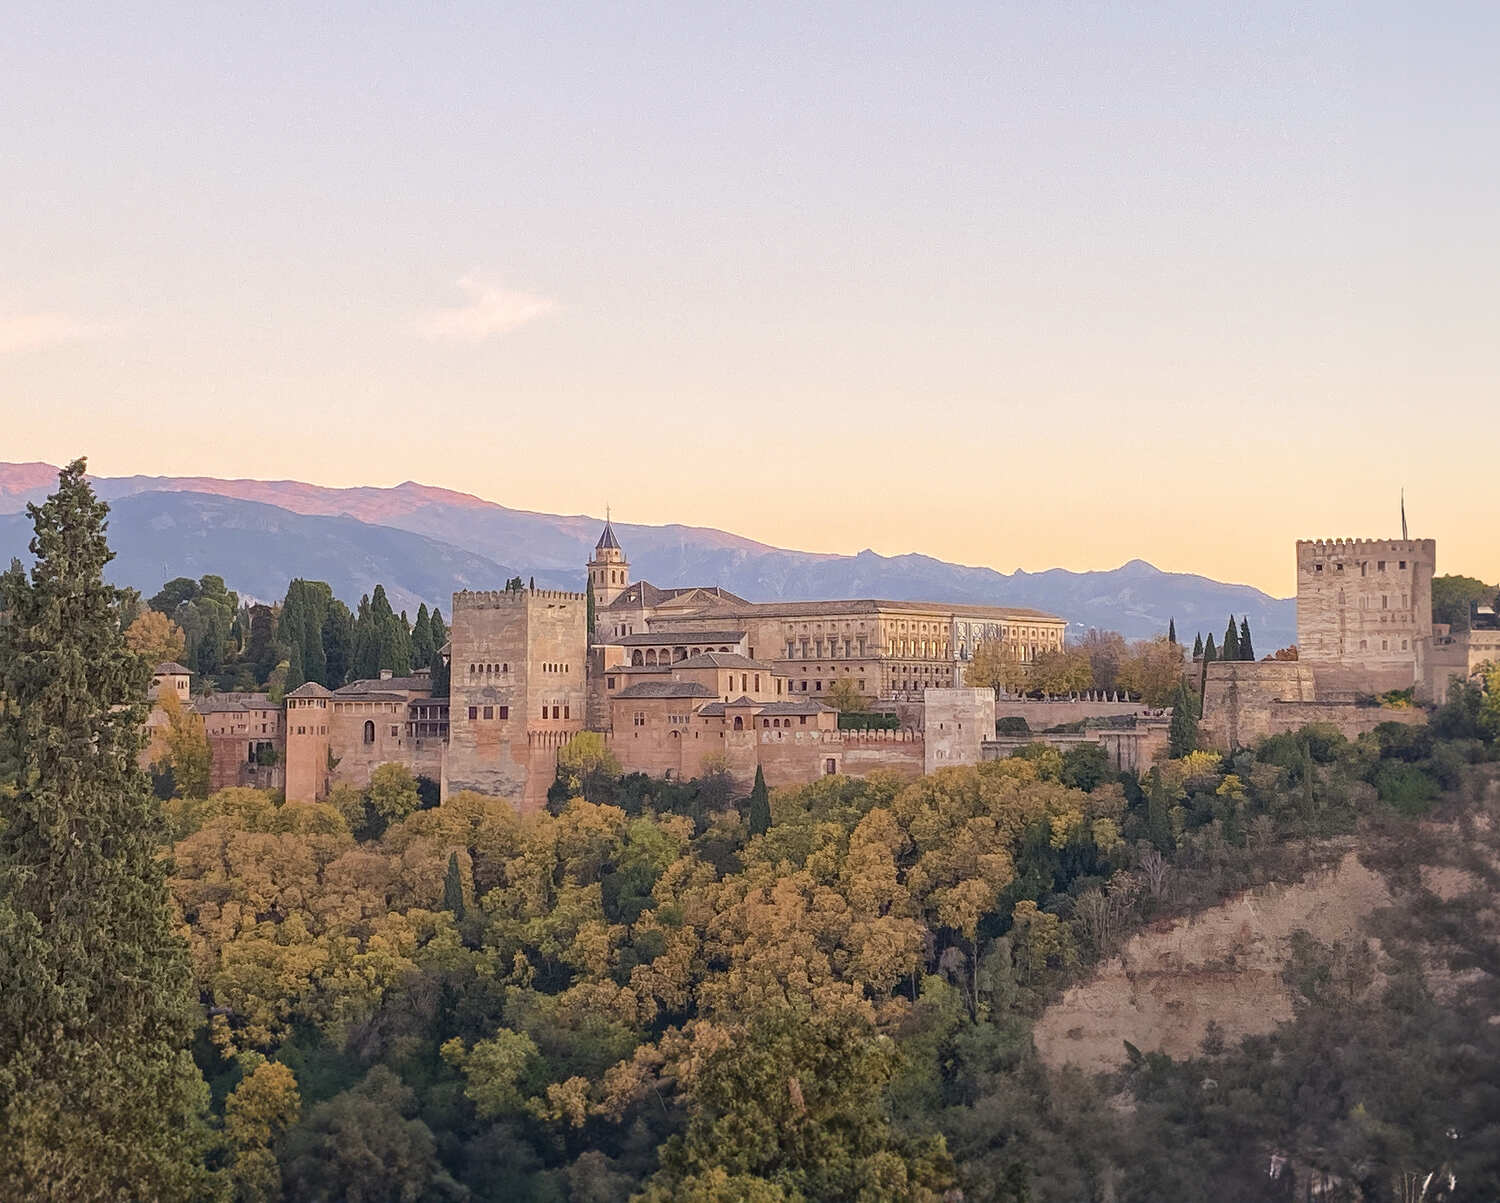 Sunset from the San Nicola Mirador with the Alhambra in the background